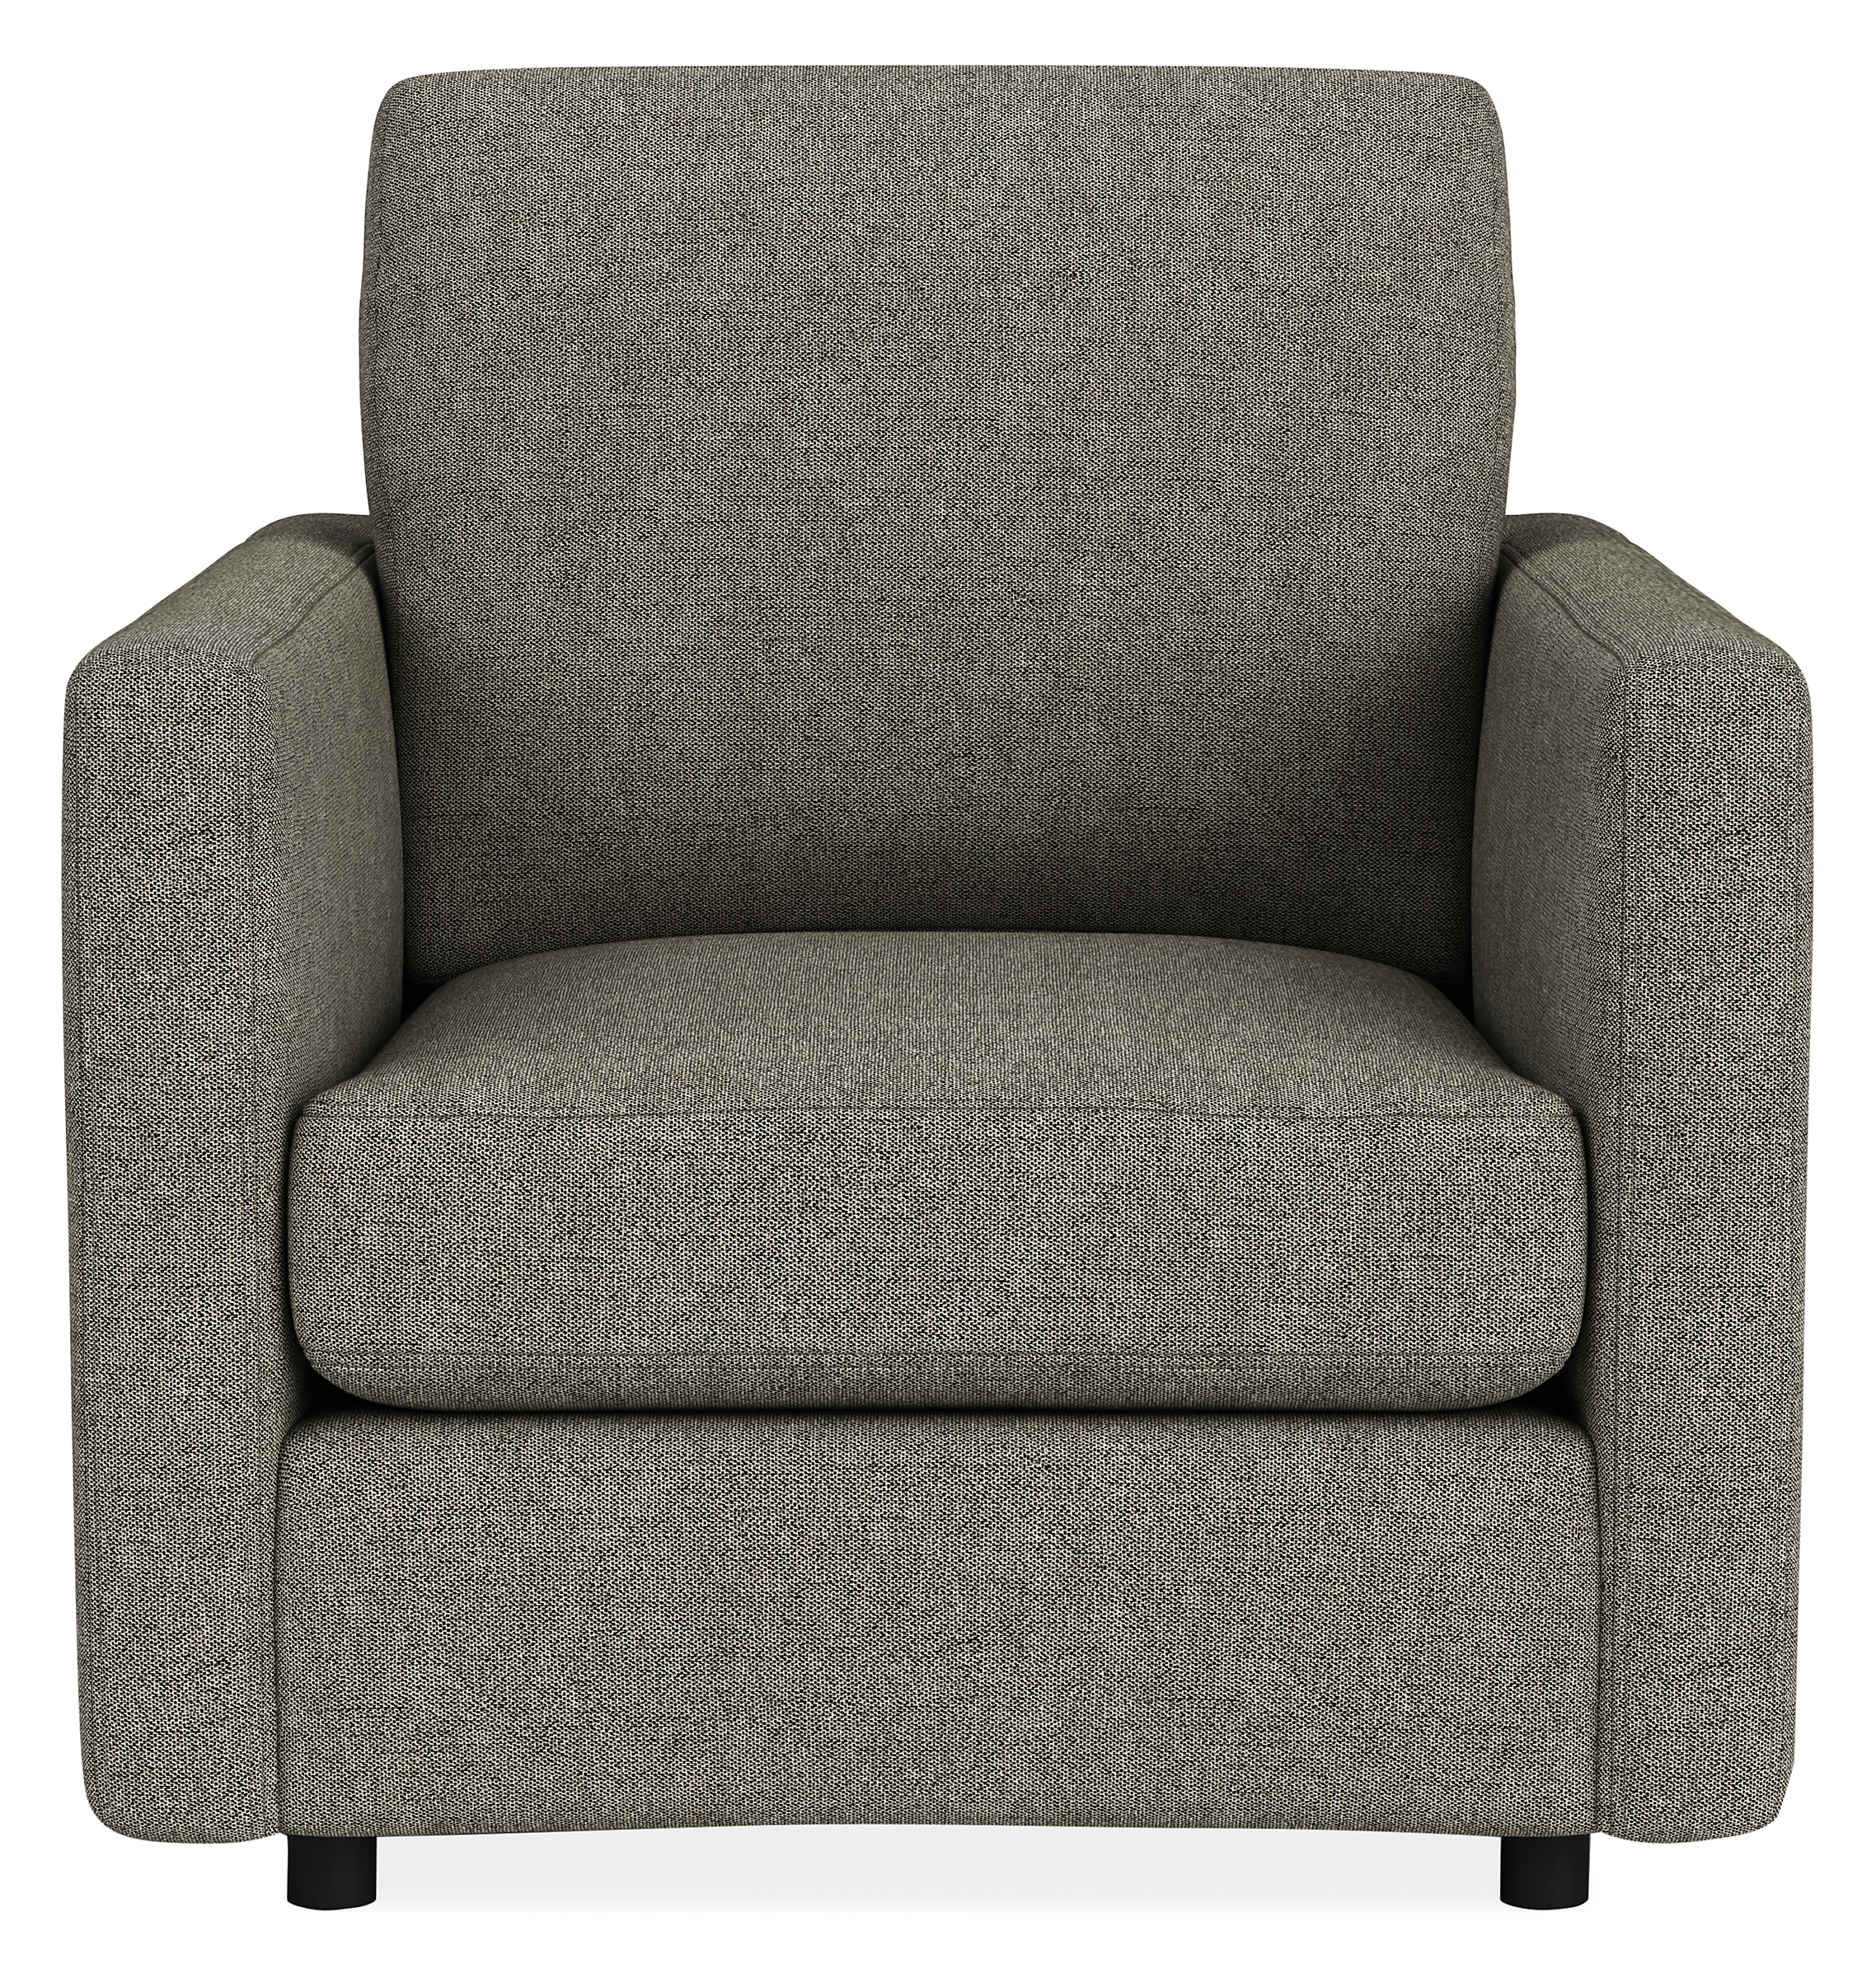 Front view of Linger 32" Chair in Tepic Fabric.